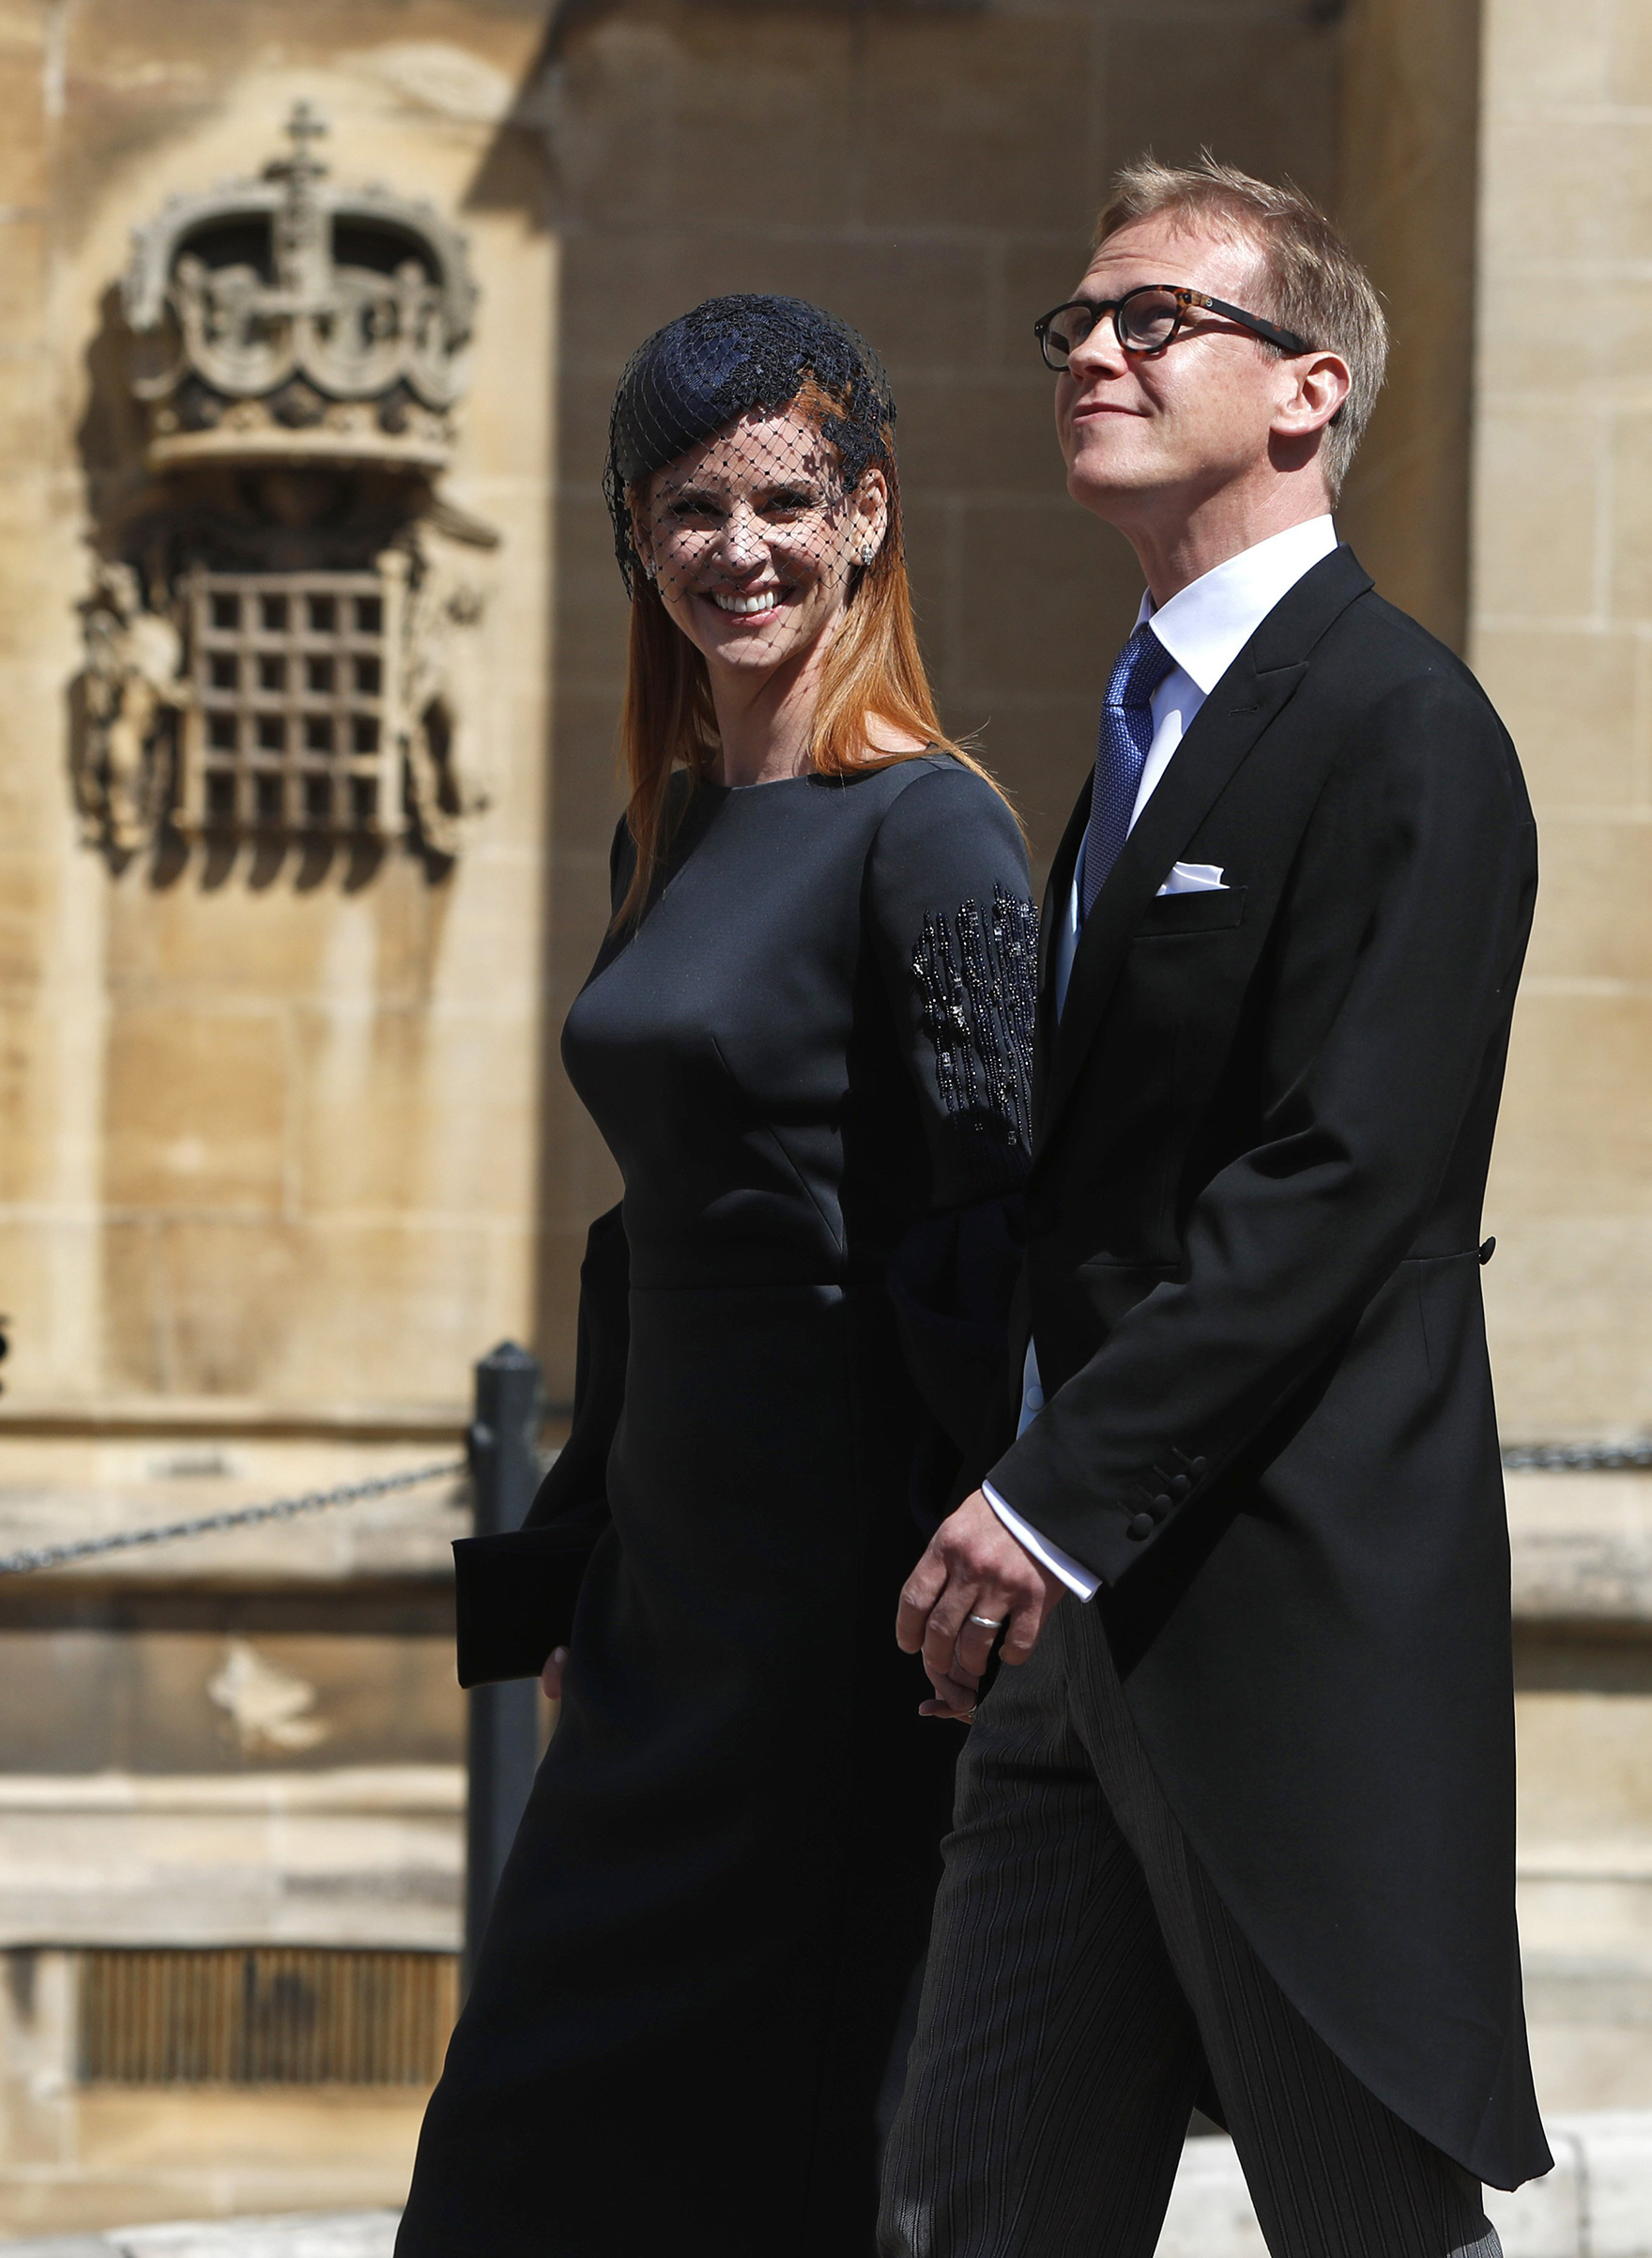 Sarah Rafferty and Santtu Seppala arrive for the wedding of Britain's Prince Harry, Duke of Sussex and Meghan Markle at St George's Chapel, Windsor Castle, in Windsor, on May 19, 2018.